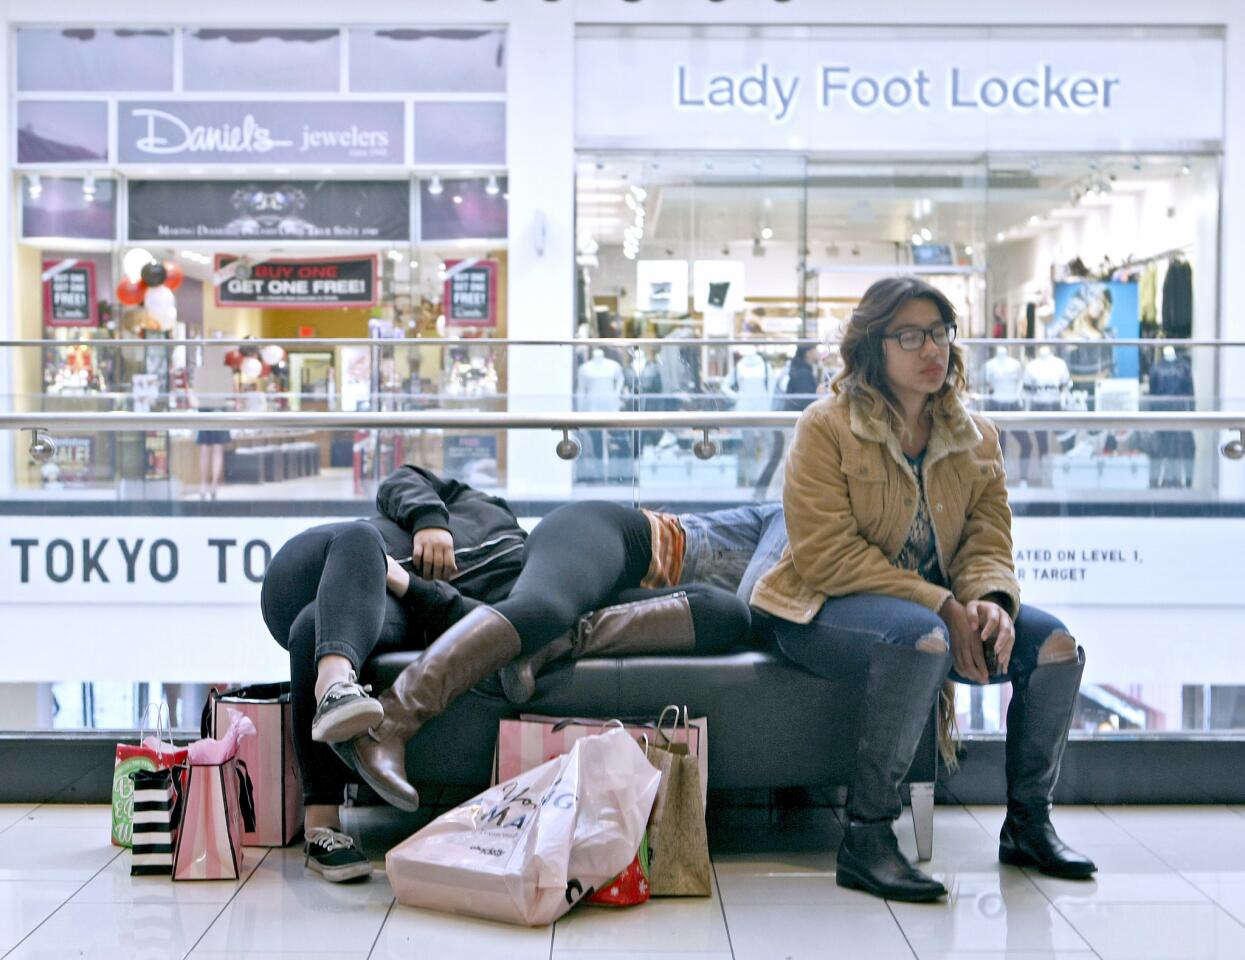 A trio of Black Friday shoppers takes a break at the Glendale Galleria on Friday, Nov. 25, 2016.